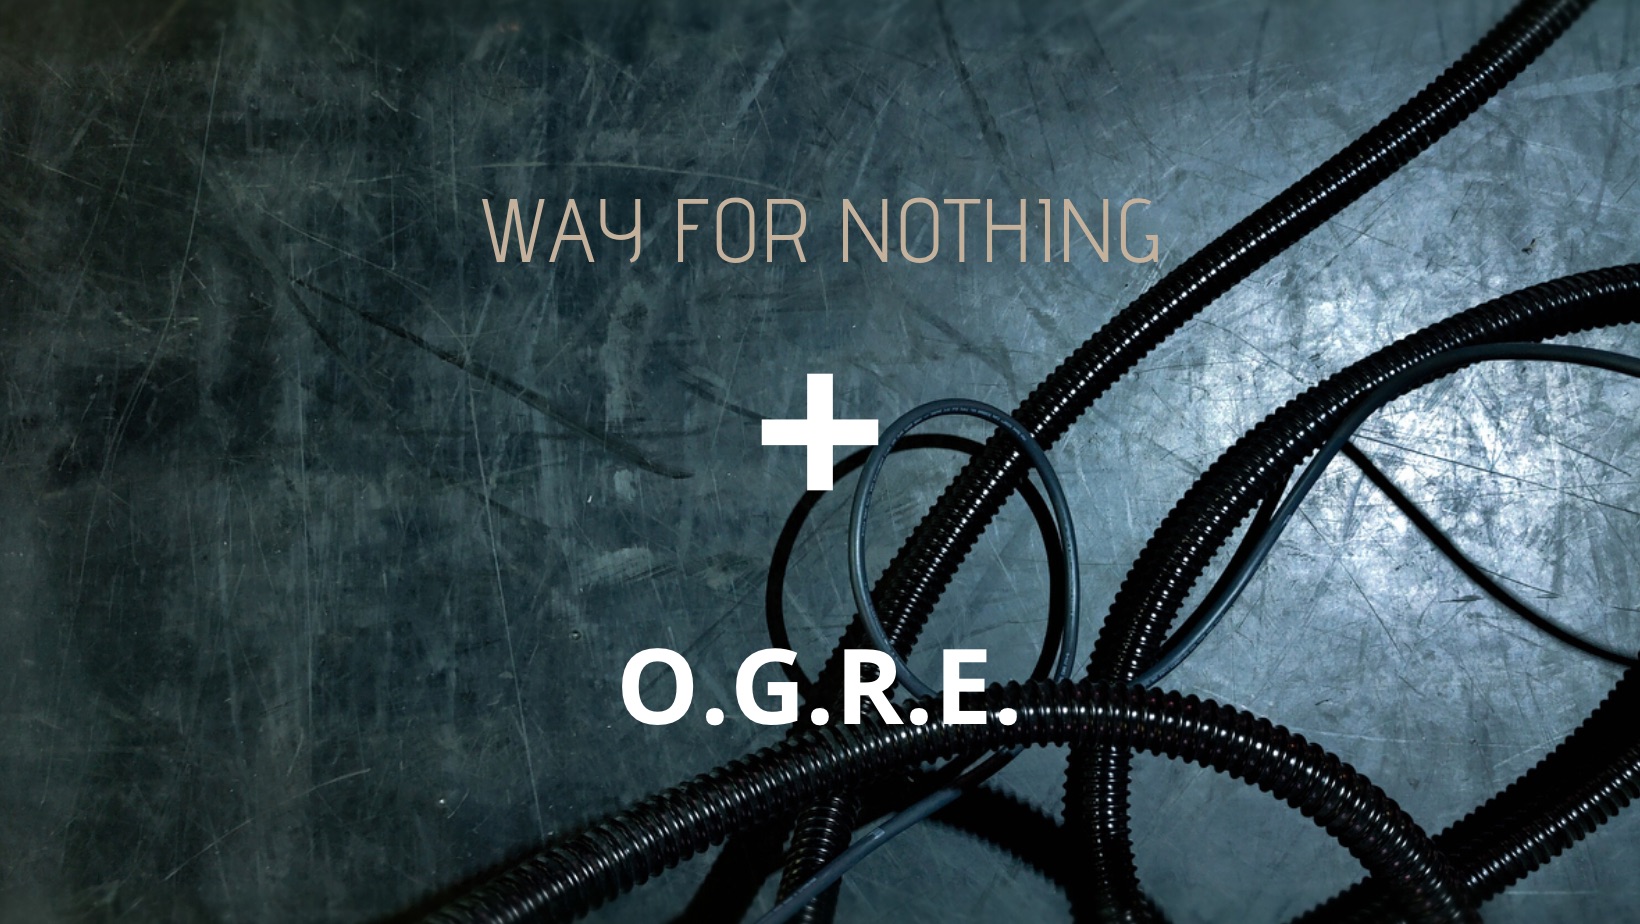 Way for Nothing + O.G.R.E.